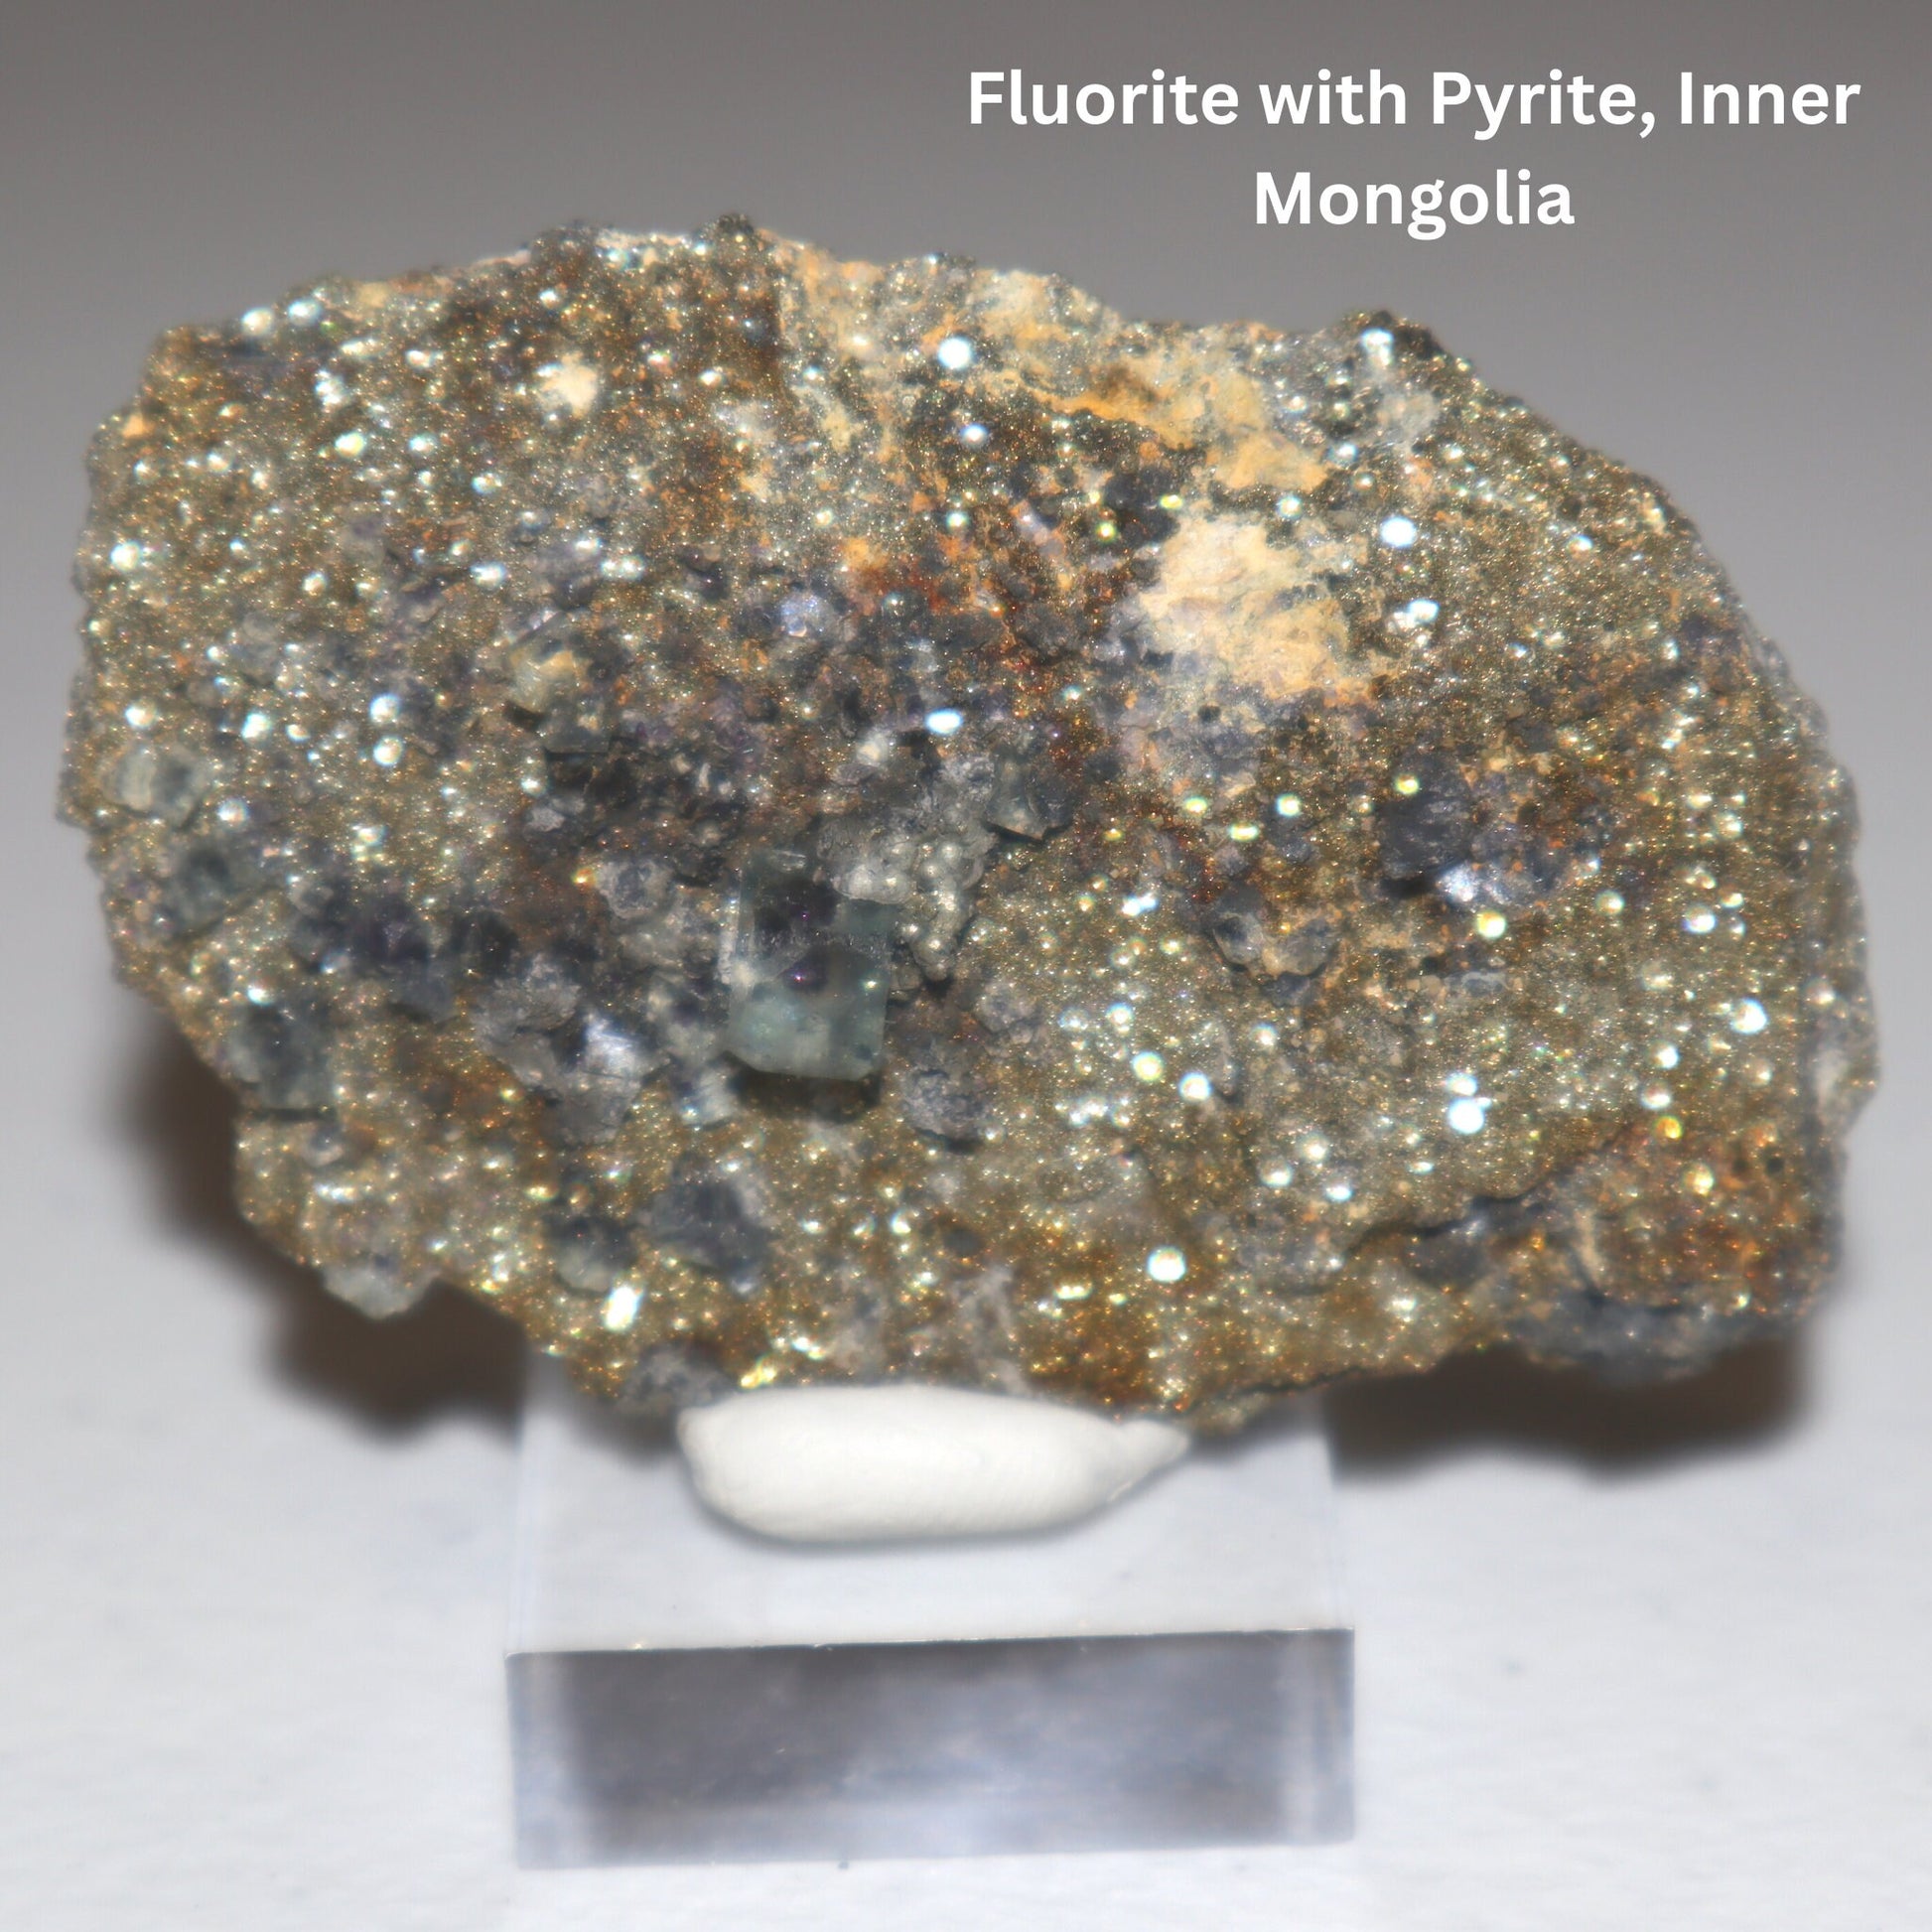 Inner Mongolia Fluorite with Pyrite Cluster, Pyrite Cluster, Fluorite Cluster, Blue Phantom Fluorite Cubes on Matrix